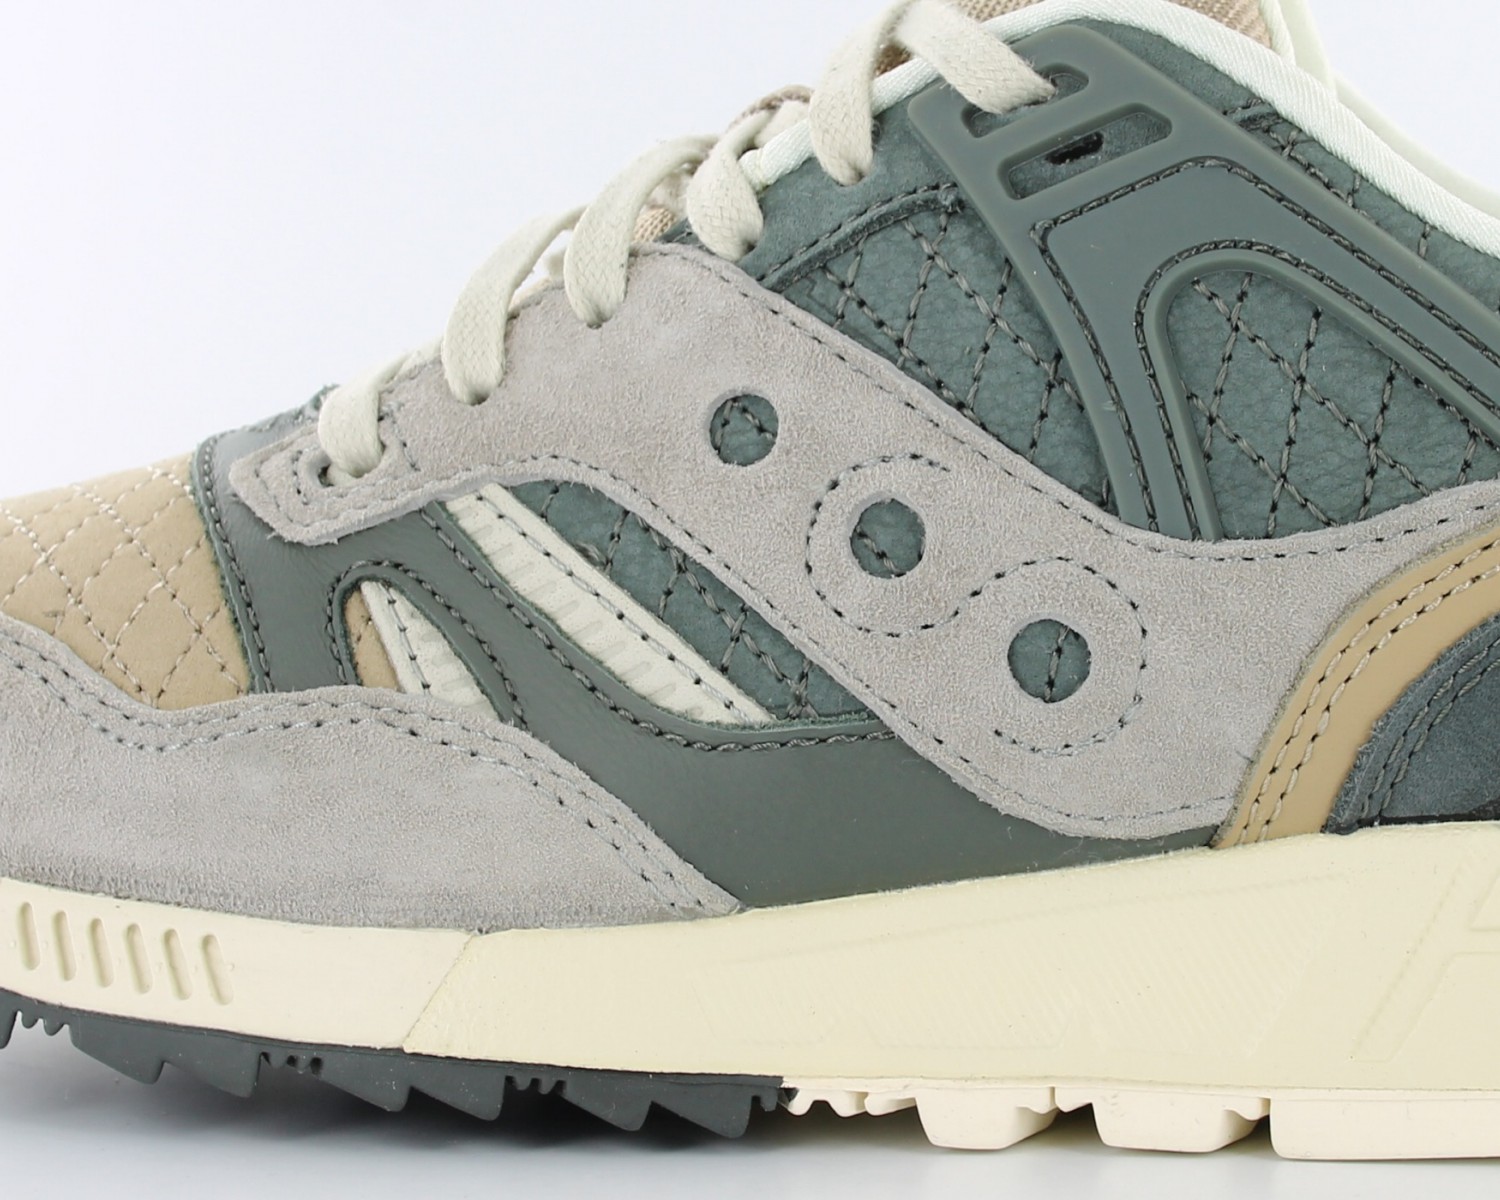 saucony grid sd quilted grey light tan